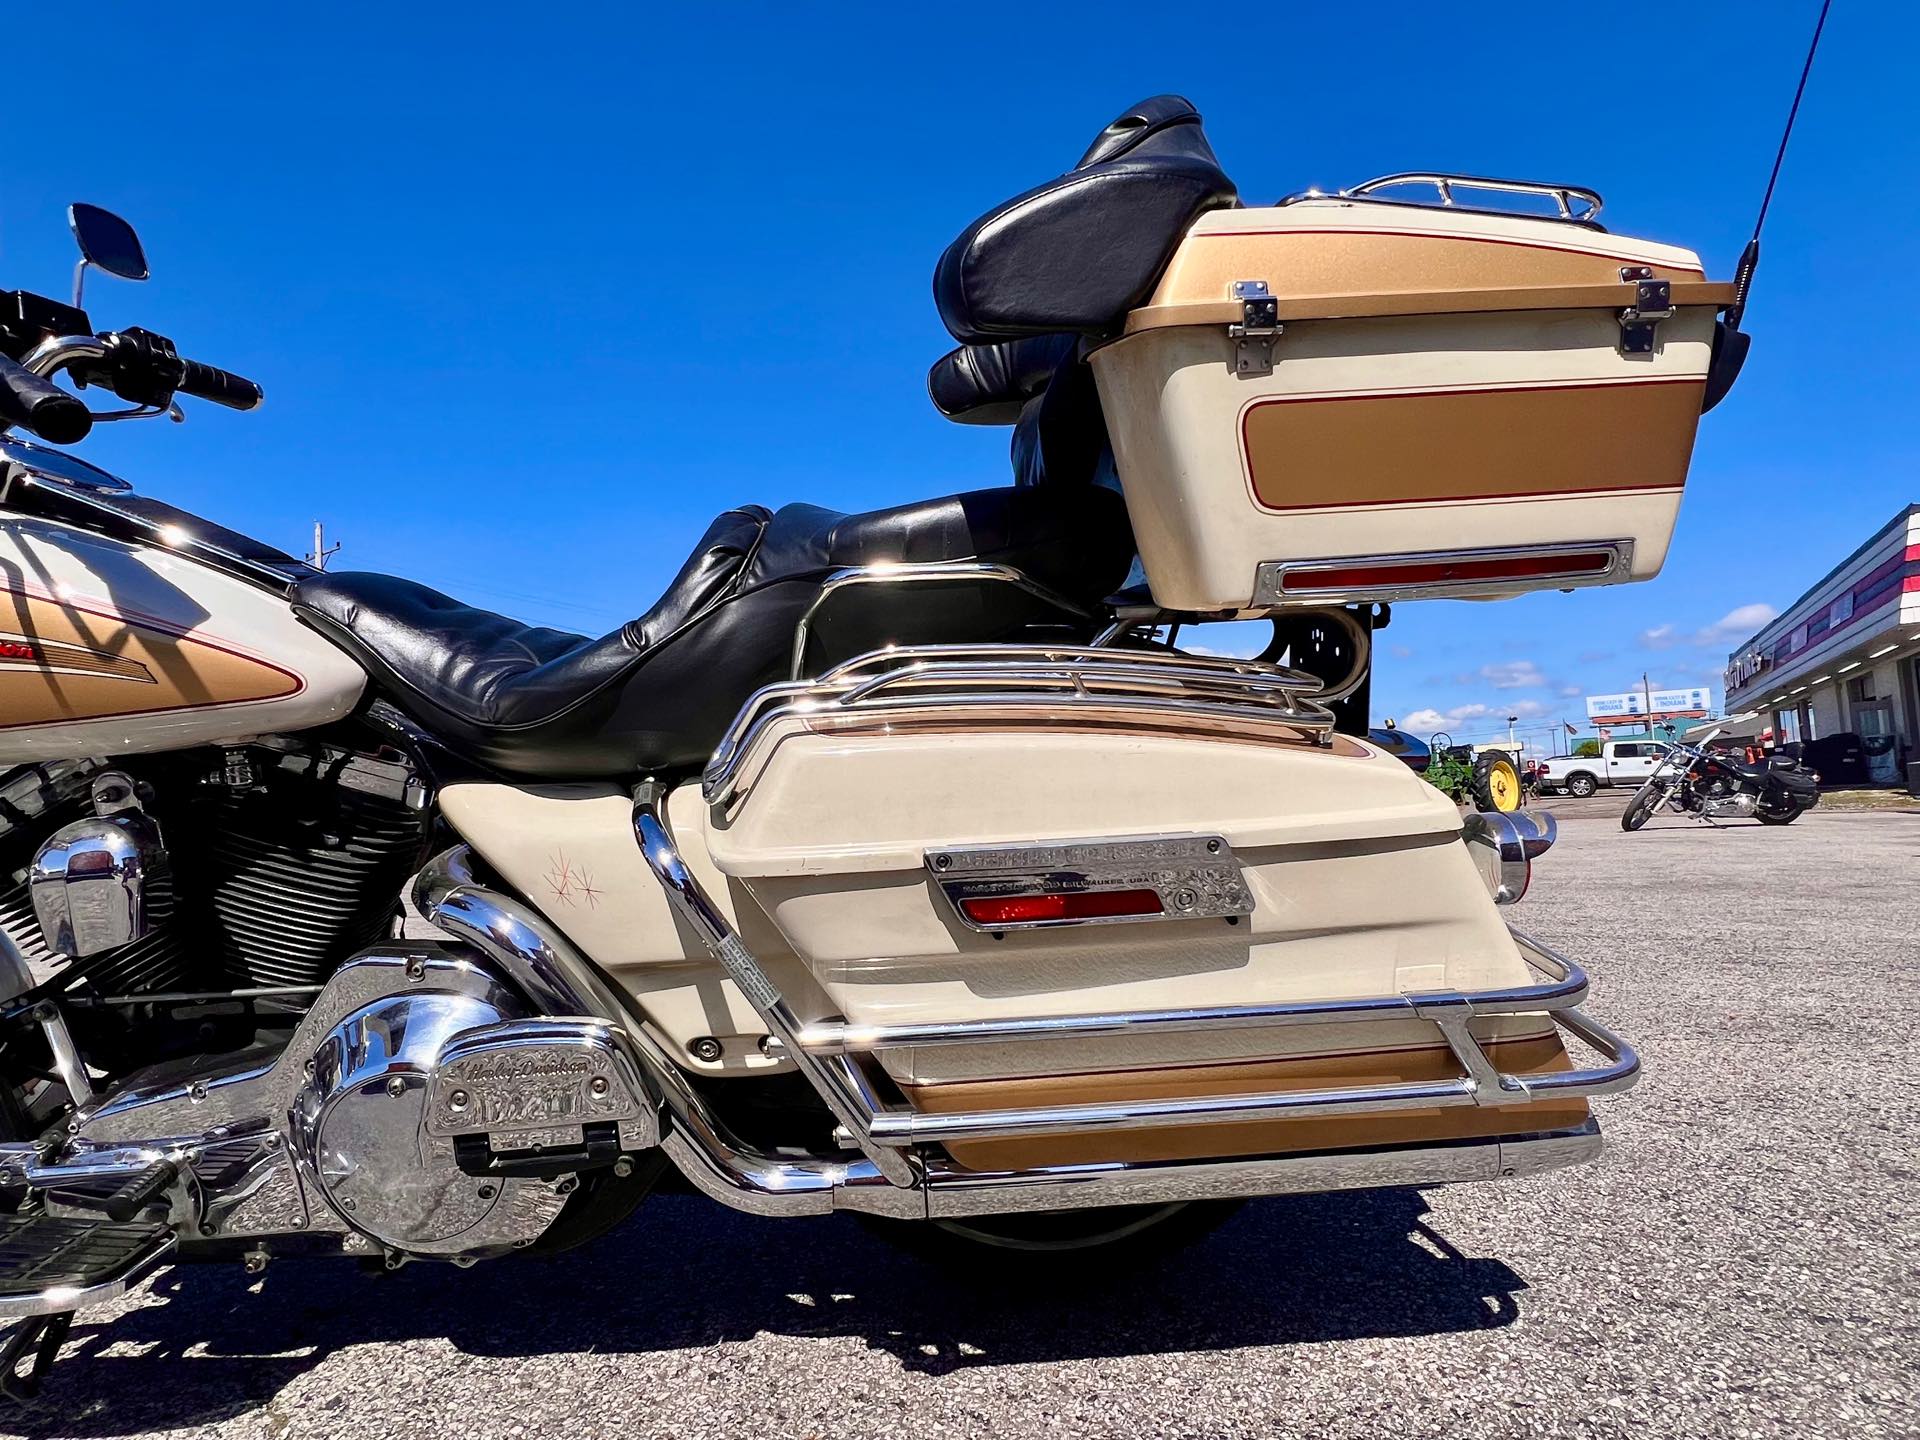 1995 Harley-Davidson Electra Glide Classic at Thornton's Motorcycle Sales, Madison, IN